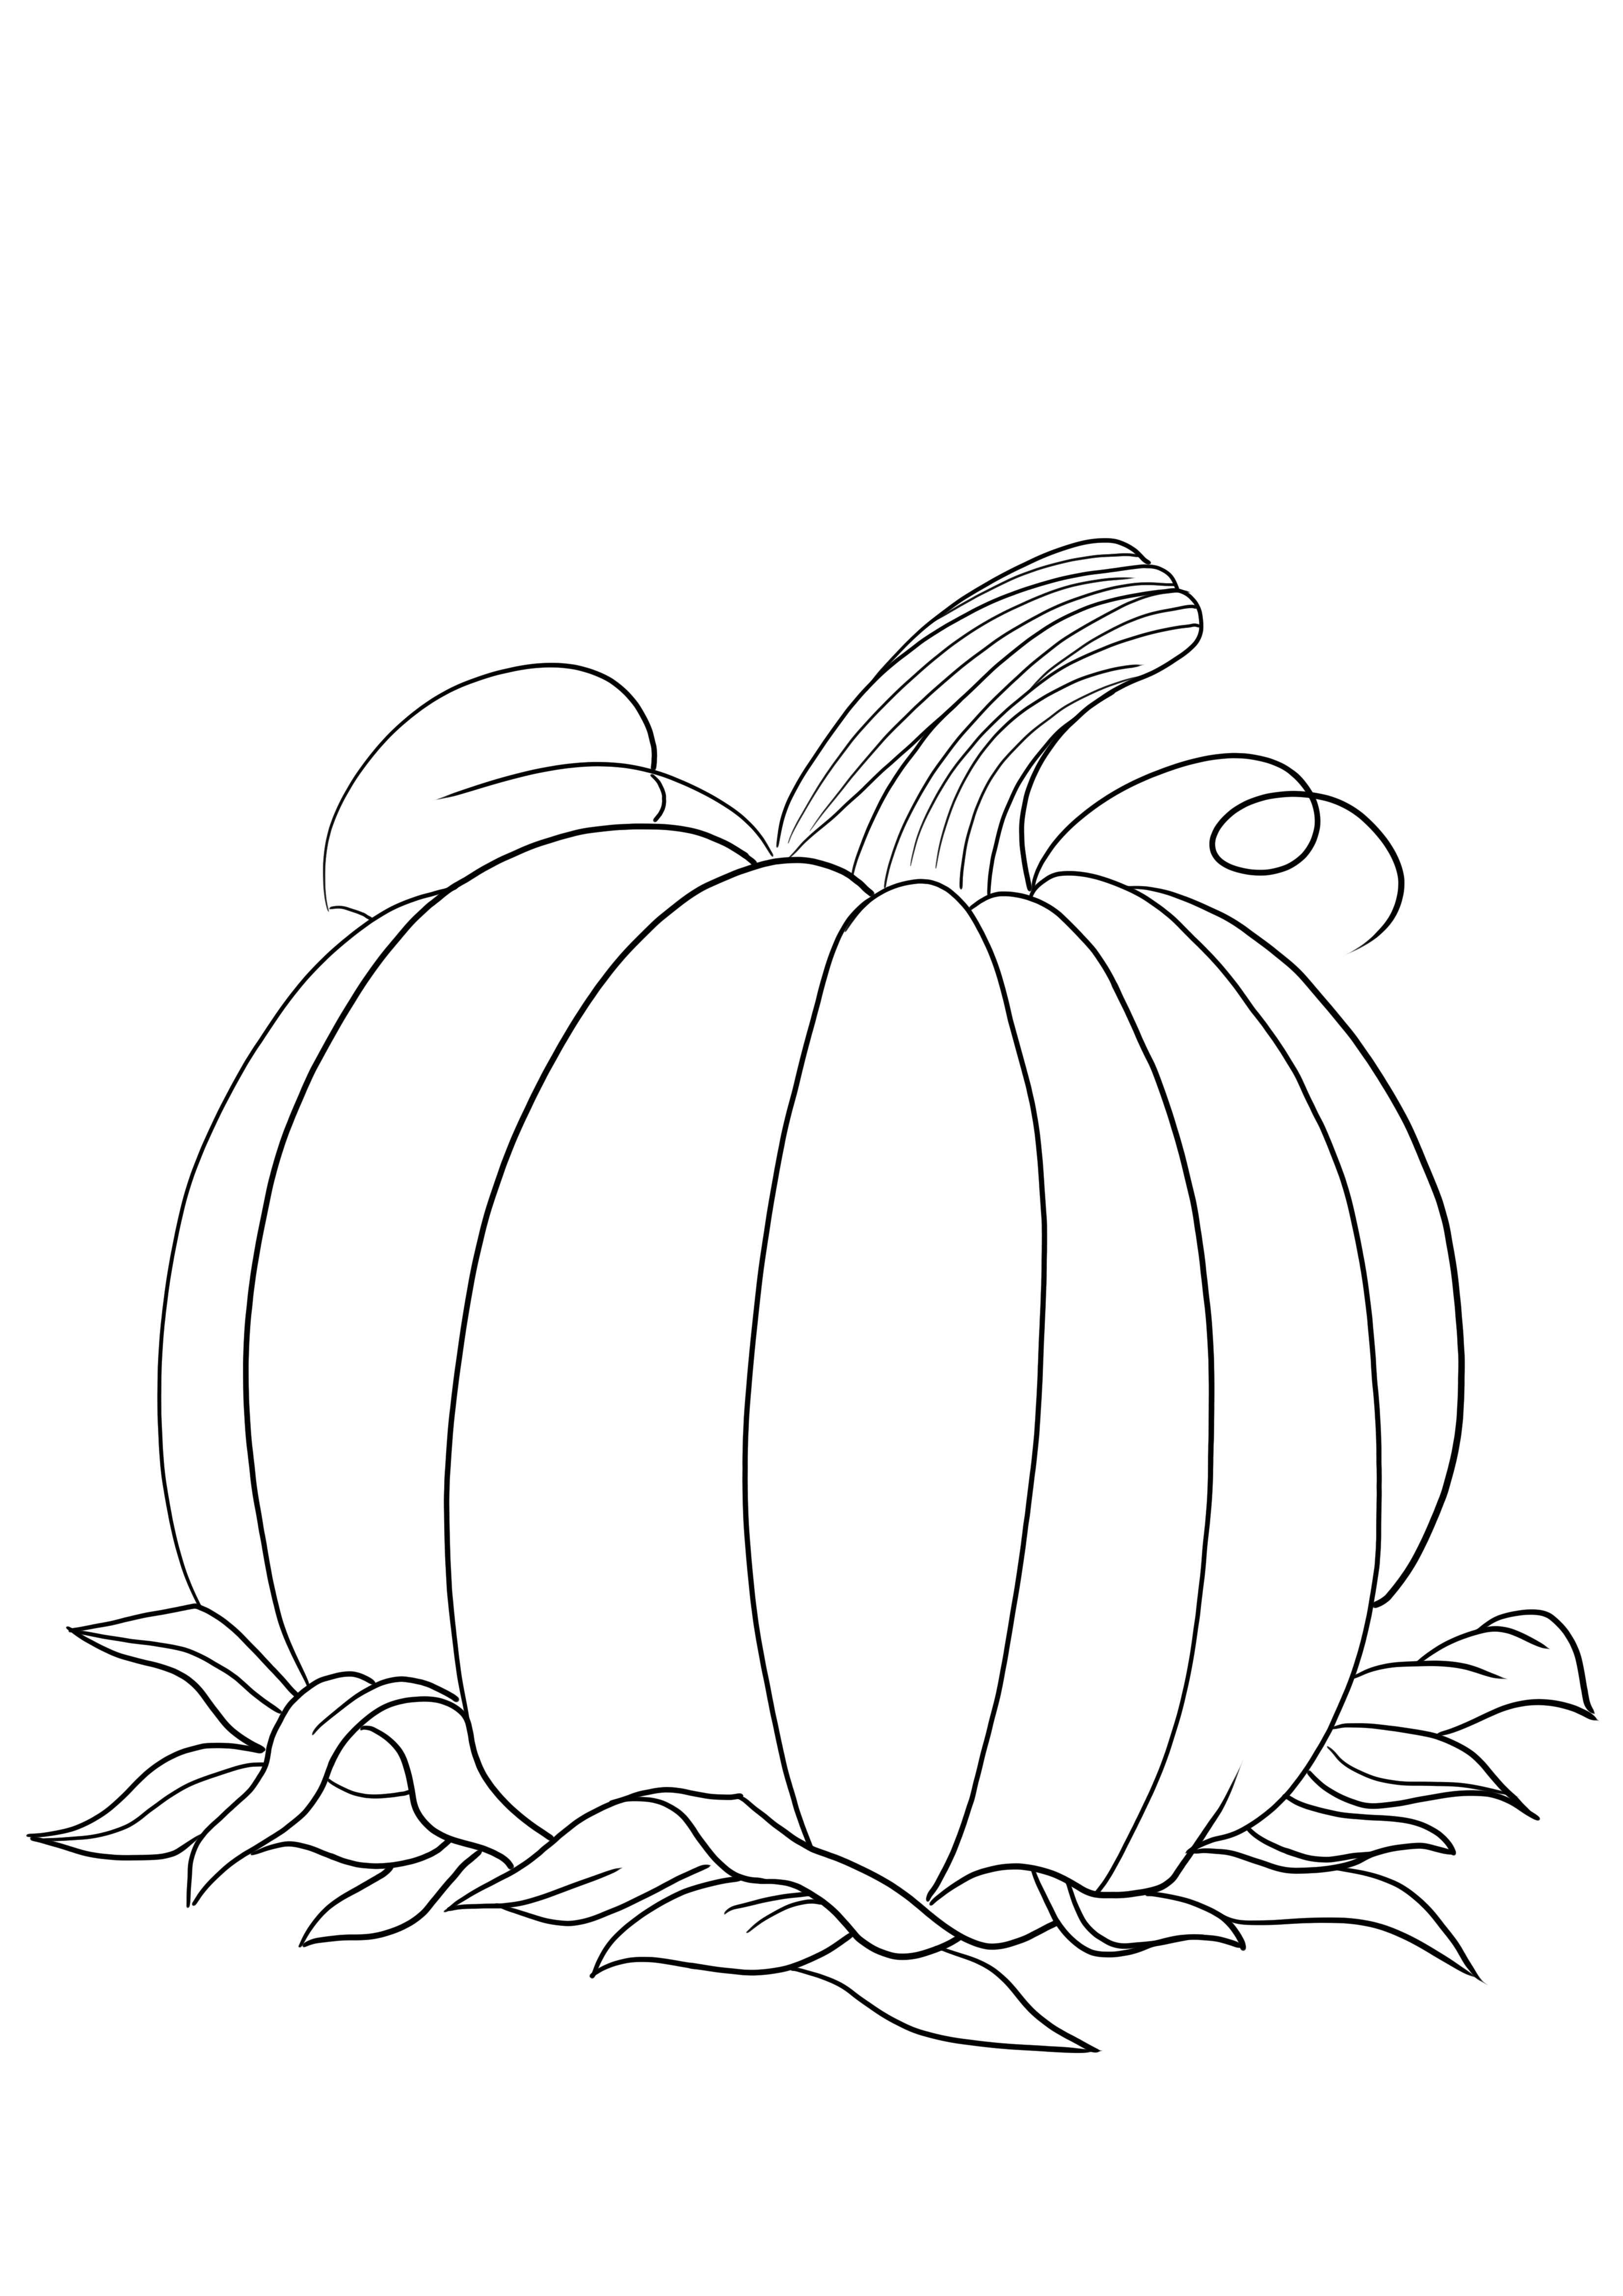 A blank pumpkin free printable for easy coloring